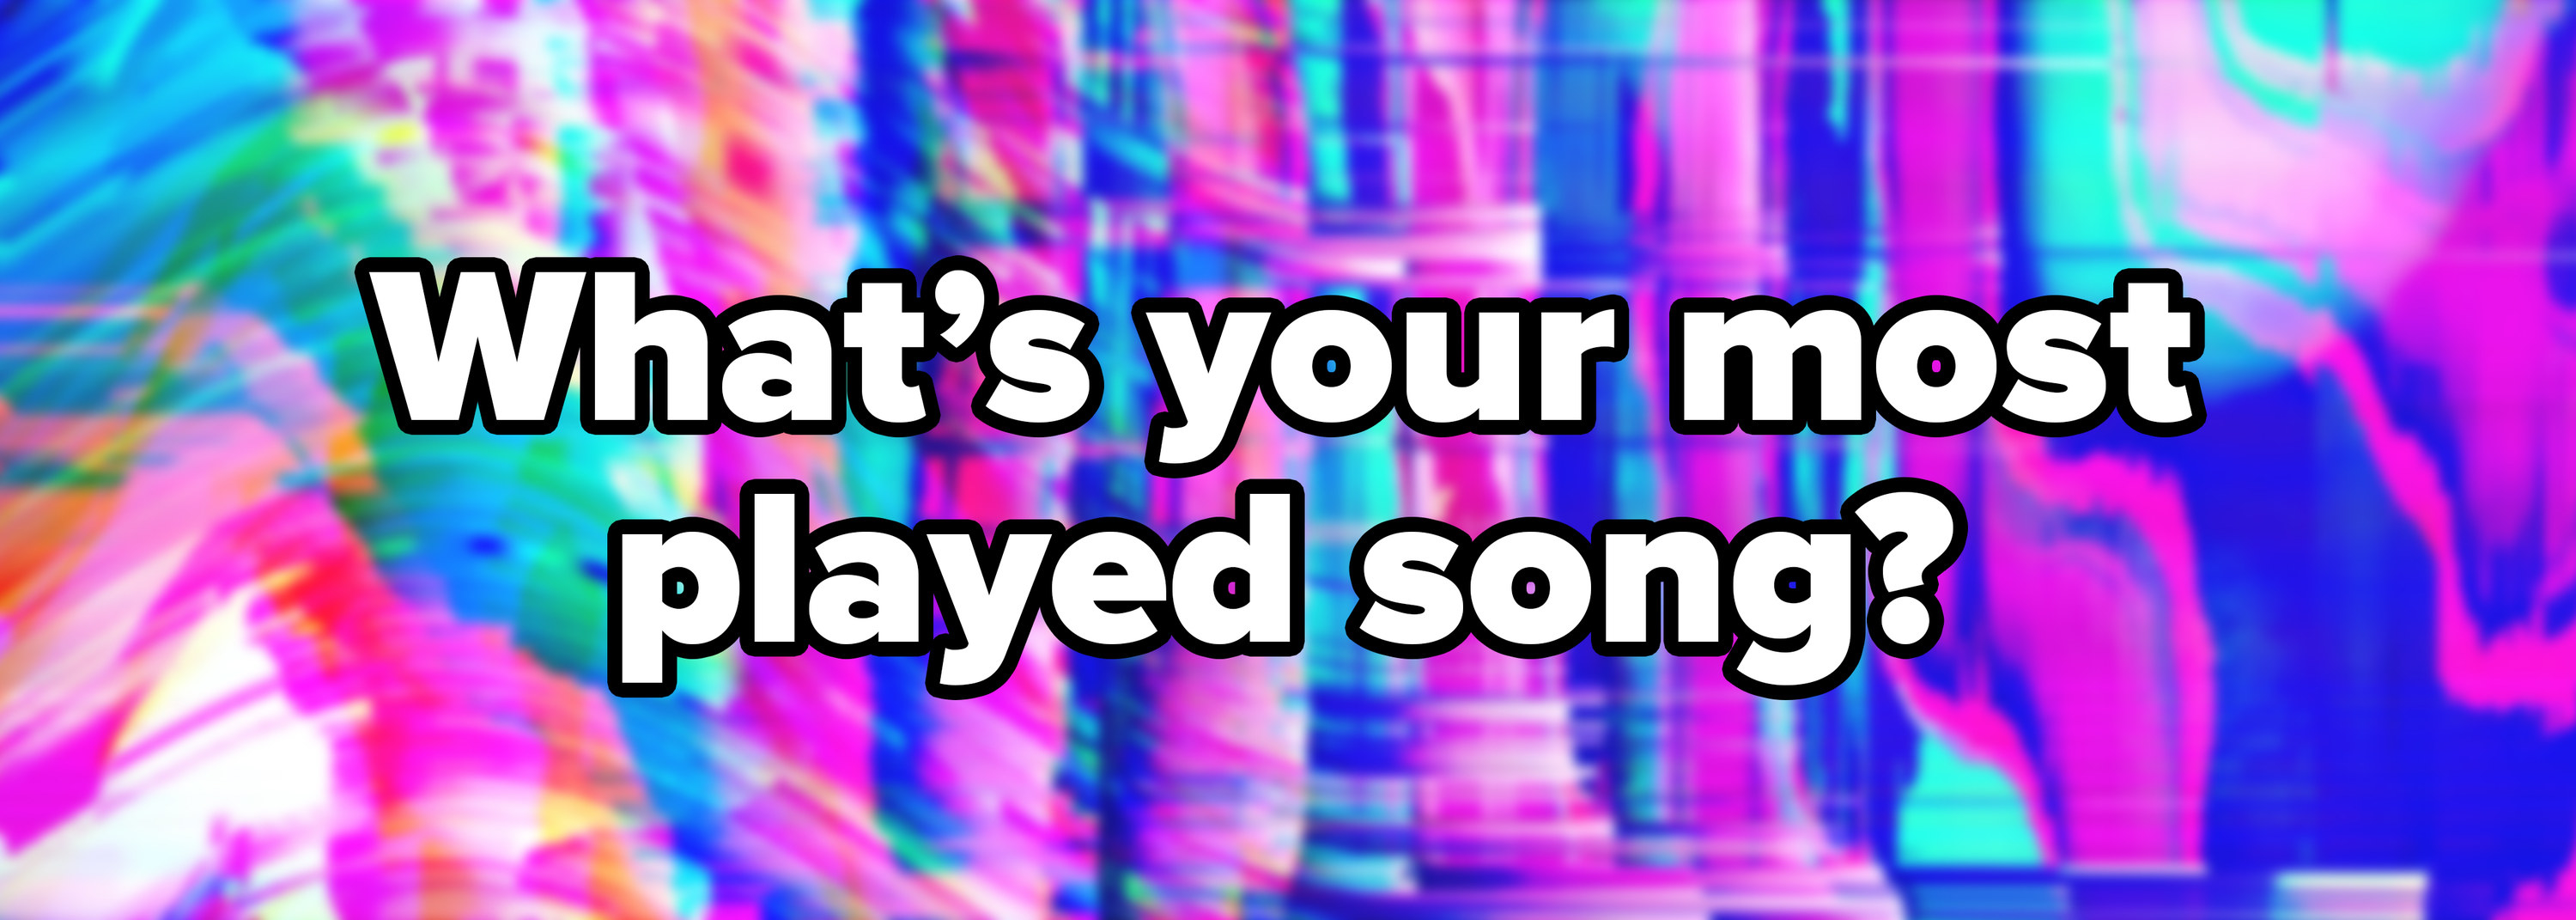 Abstract pink, blue, mint, and neon psychedelic background with the question &quot;What&#x27;s your most played song?&quot; written on top